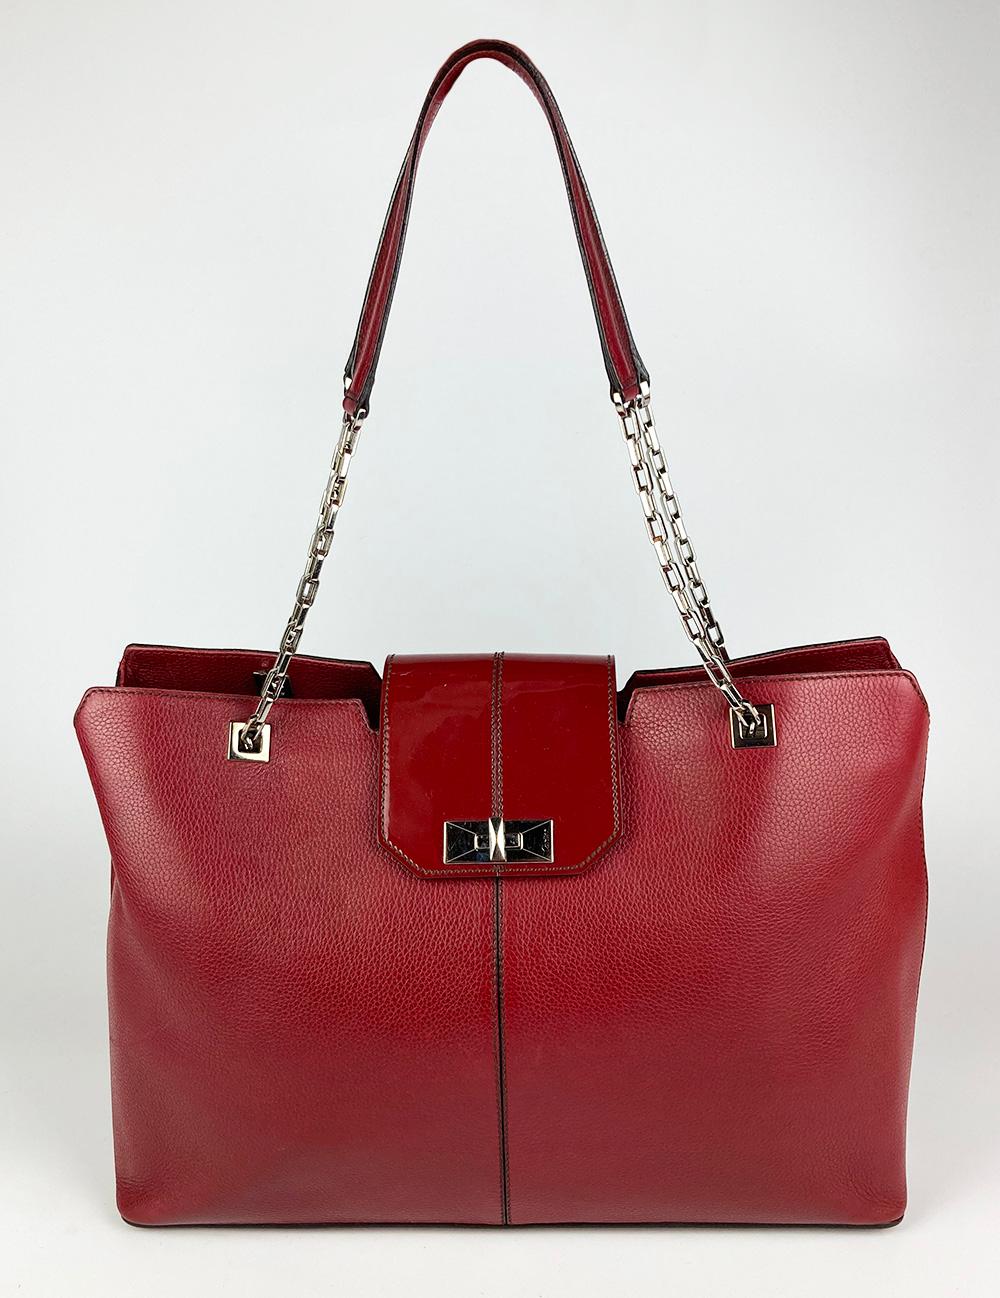 Cartier Red Leather Tote in very good condition. red pebble leather body with patent leather top flap and silver hardware trim. Red leather and silver chain double shoulder strap. 4 silver feet on bottom. Silver mademoiselle twist lock closure opens